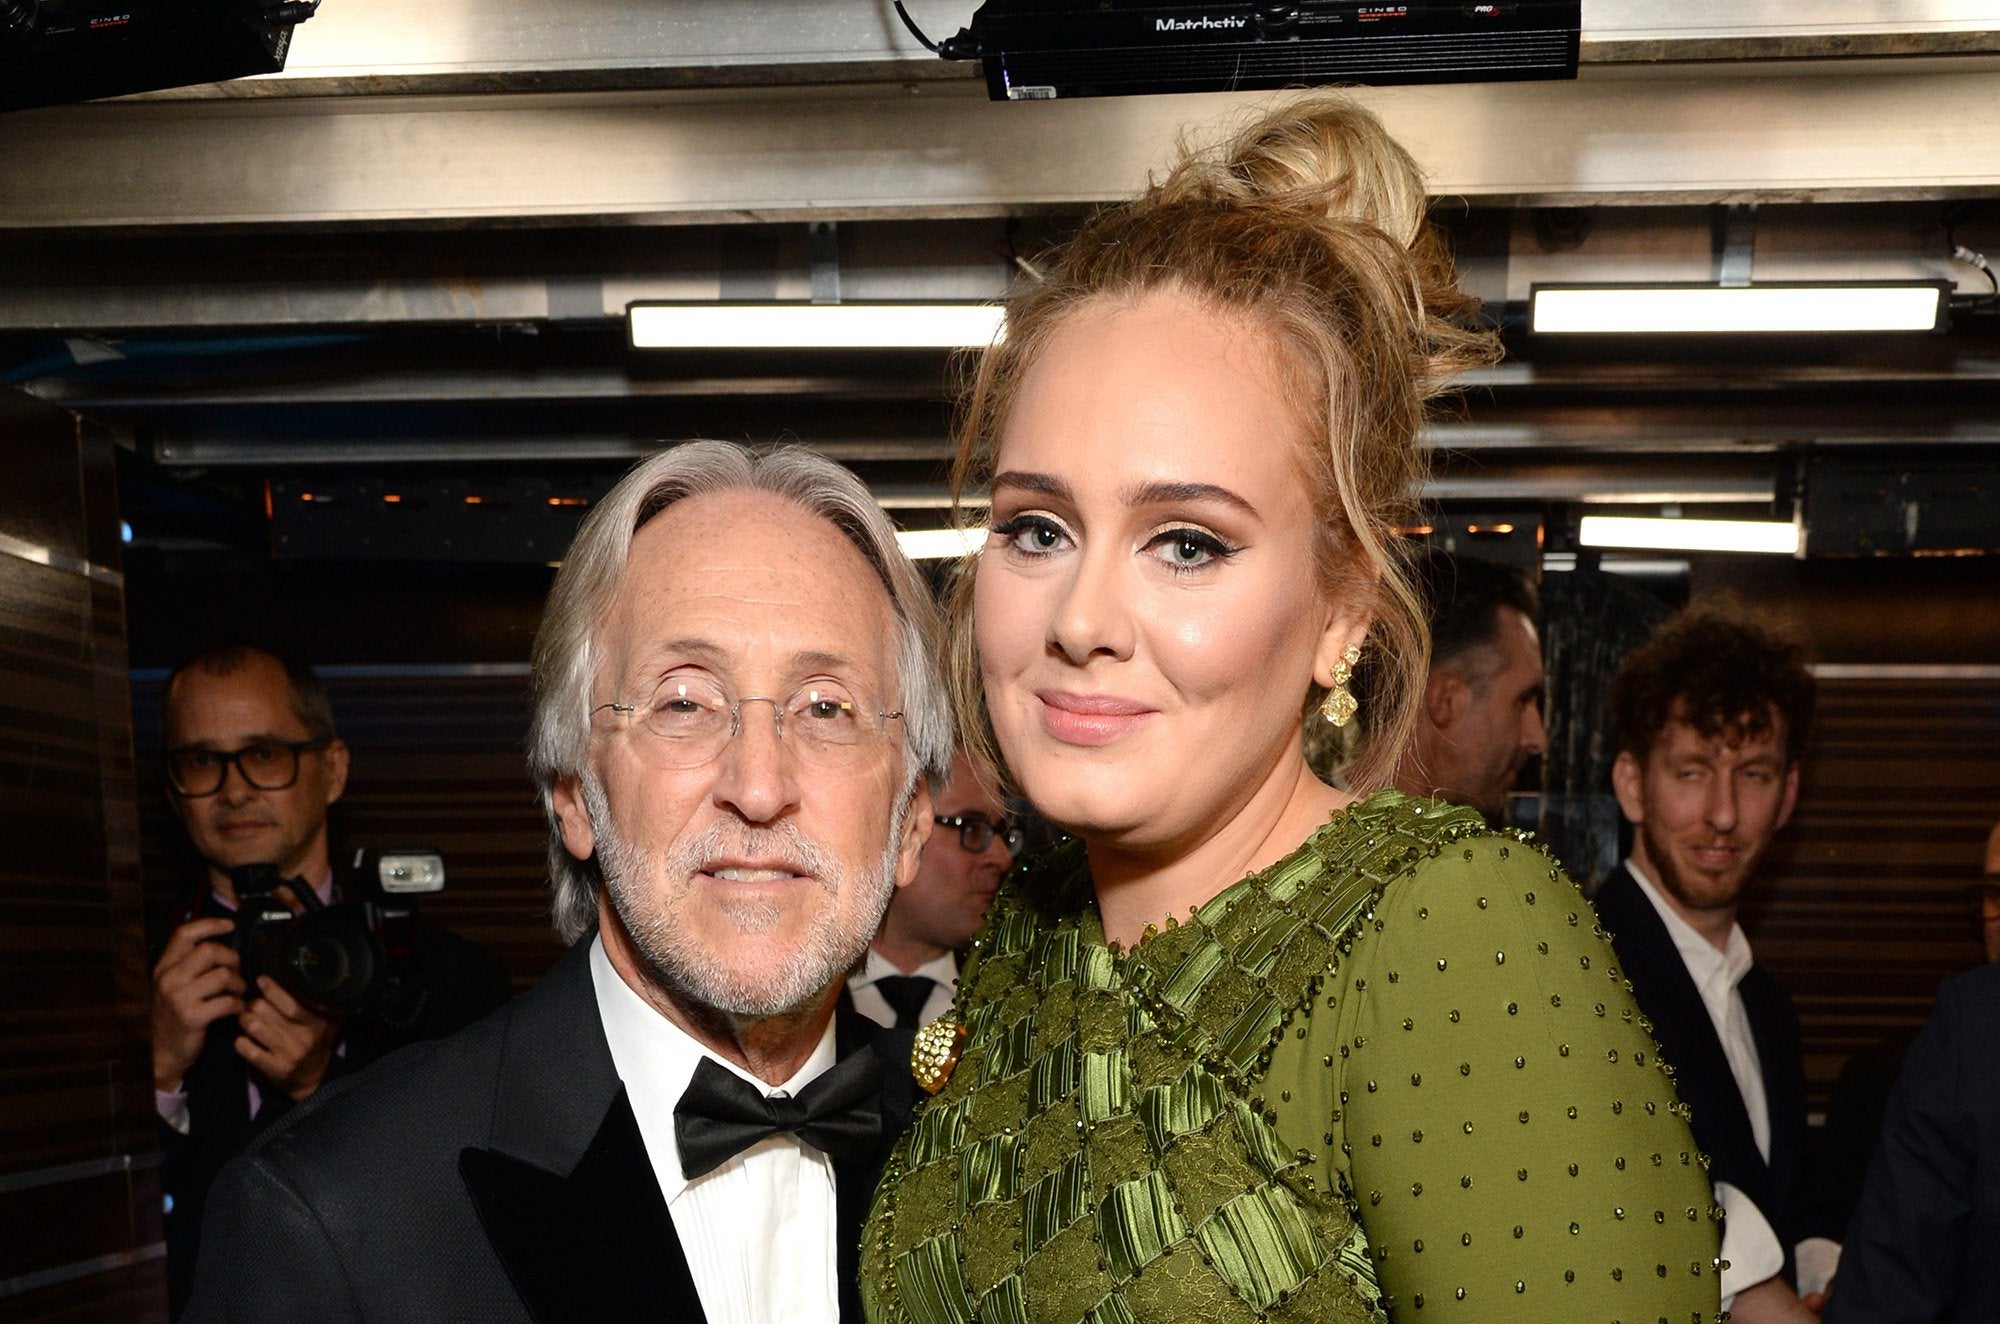 Grammys President Neil Portnow: ‘I Don’t Think There’s a Race Problem at All’